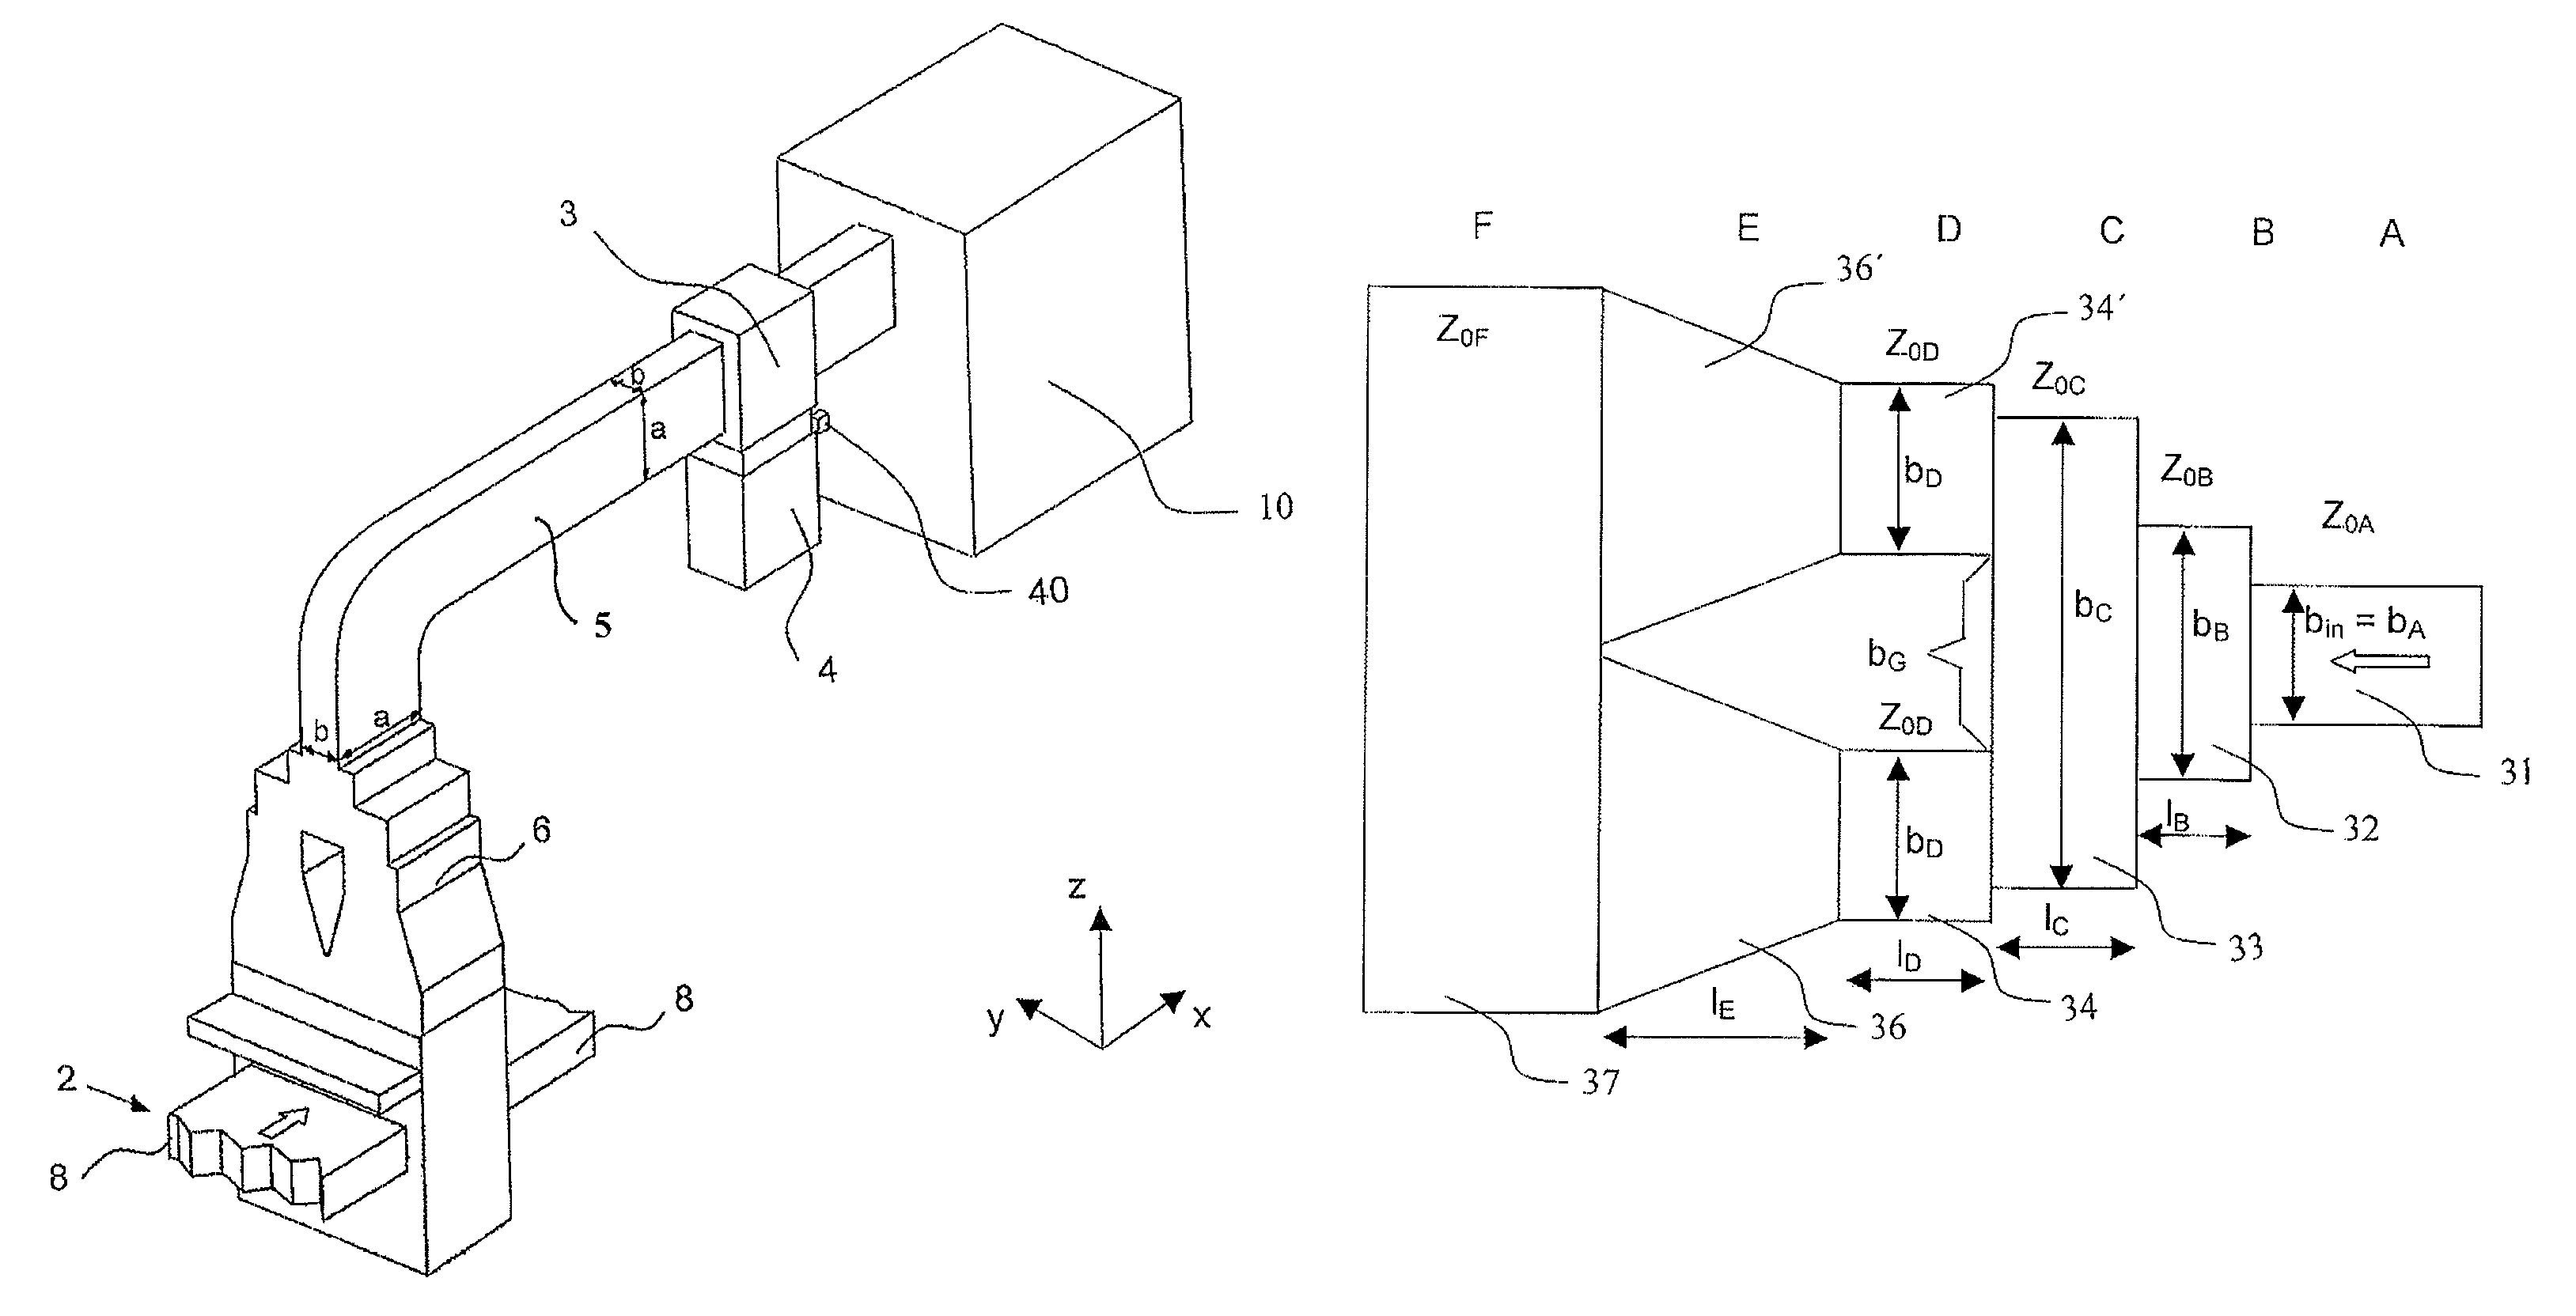 Apparatus for microwave heating of a planar product including a multi-segment waveguide element